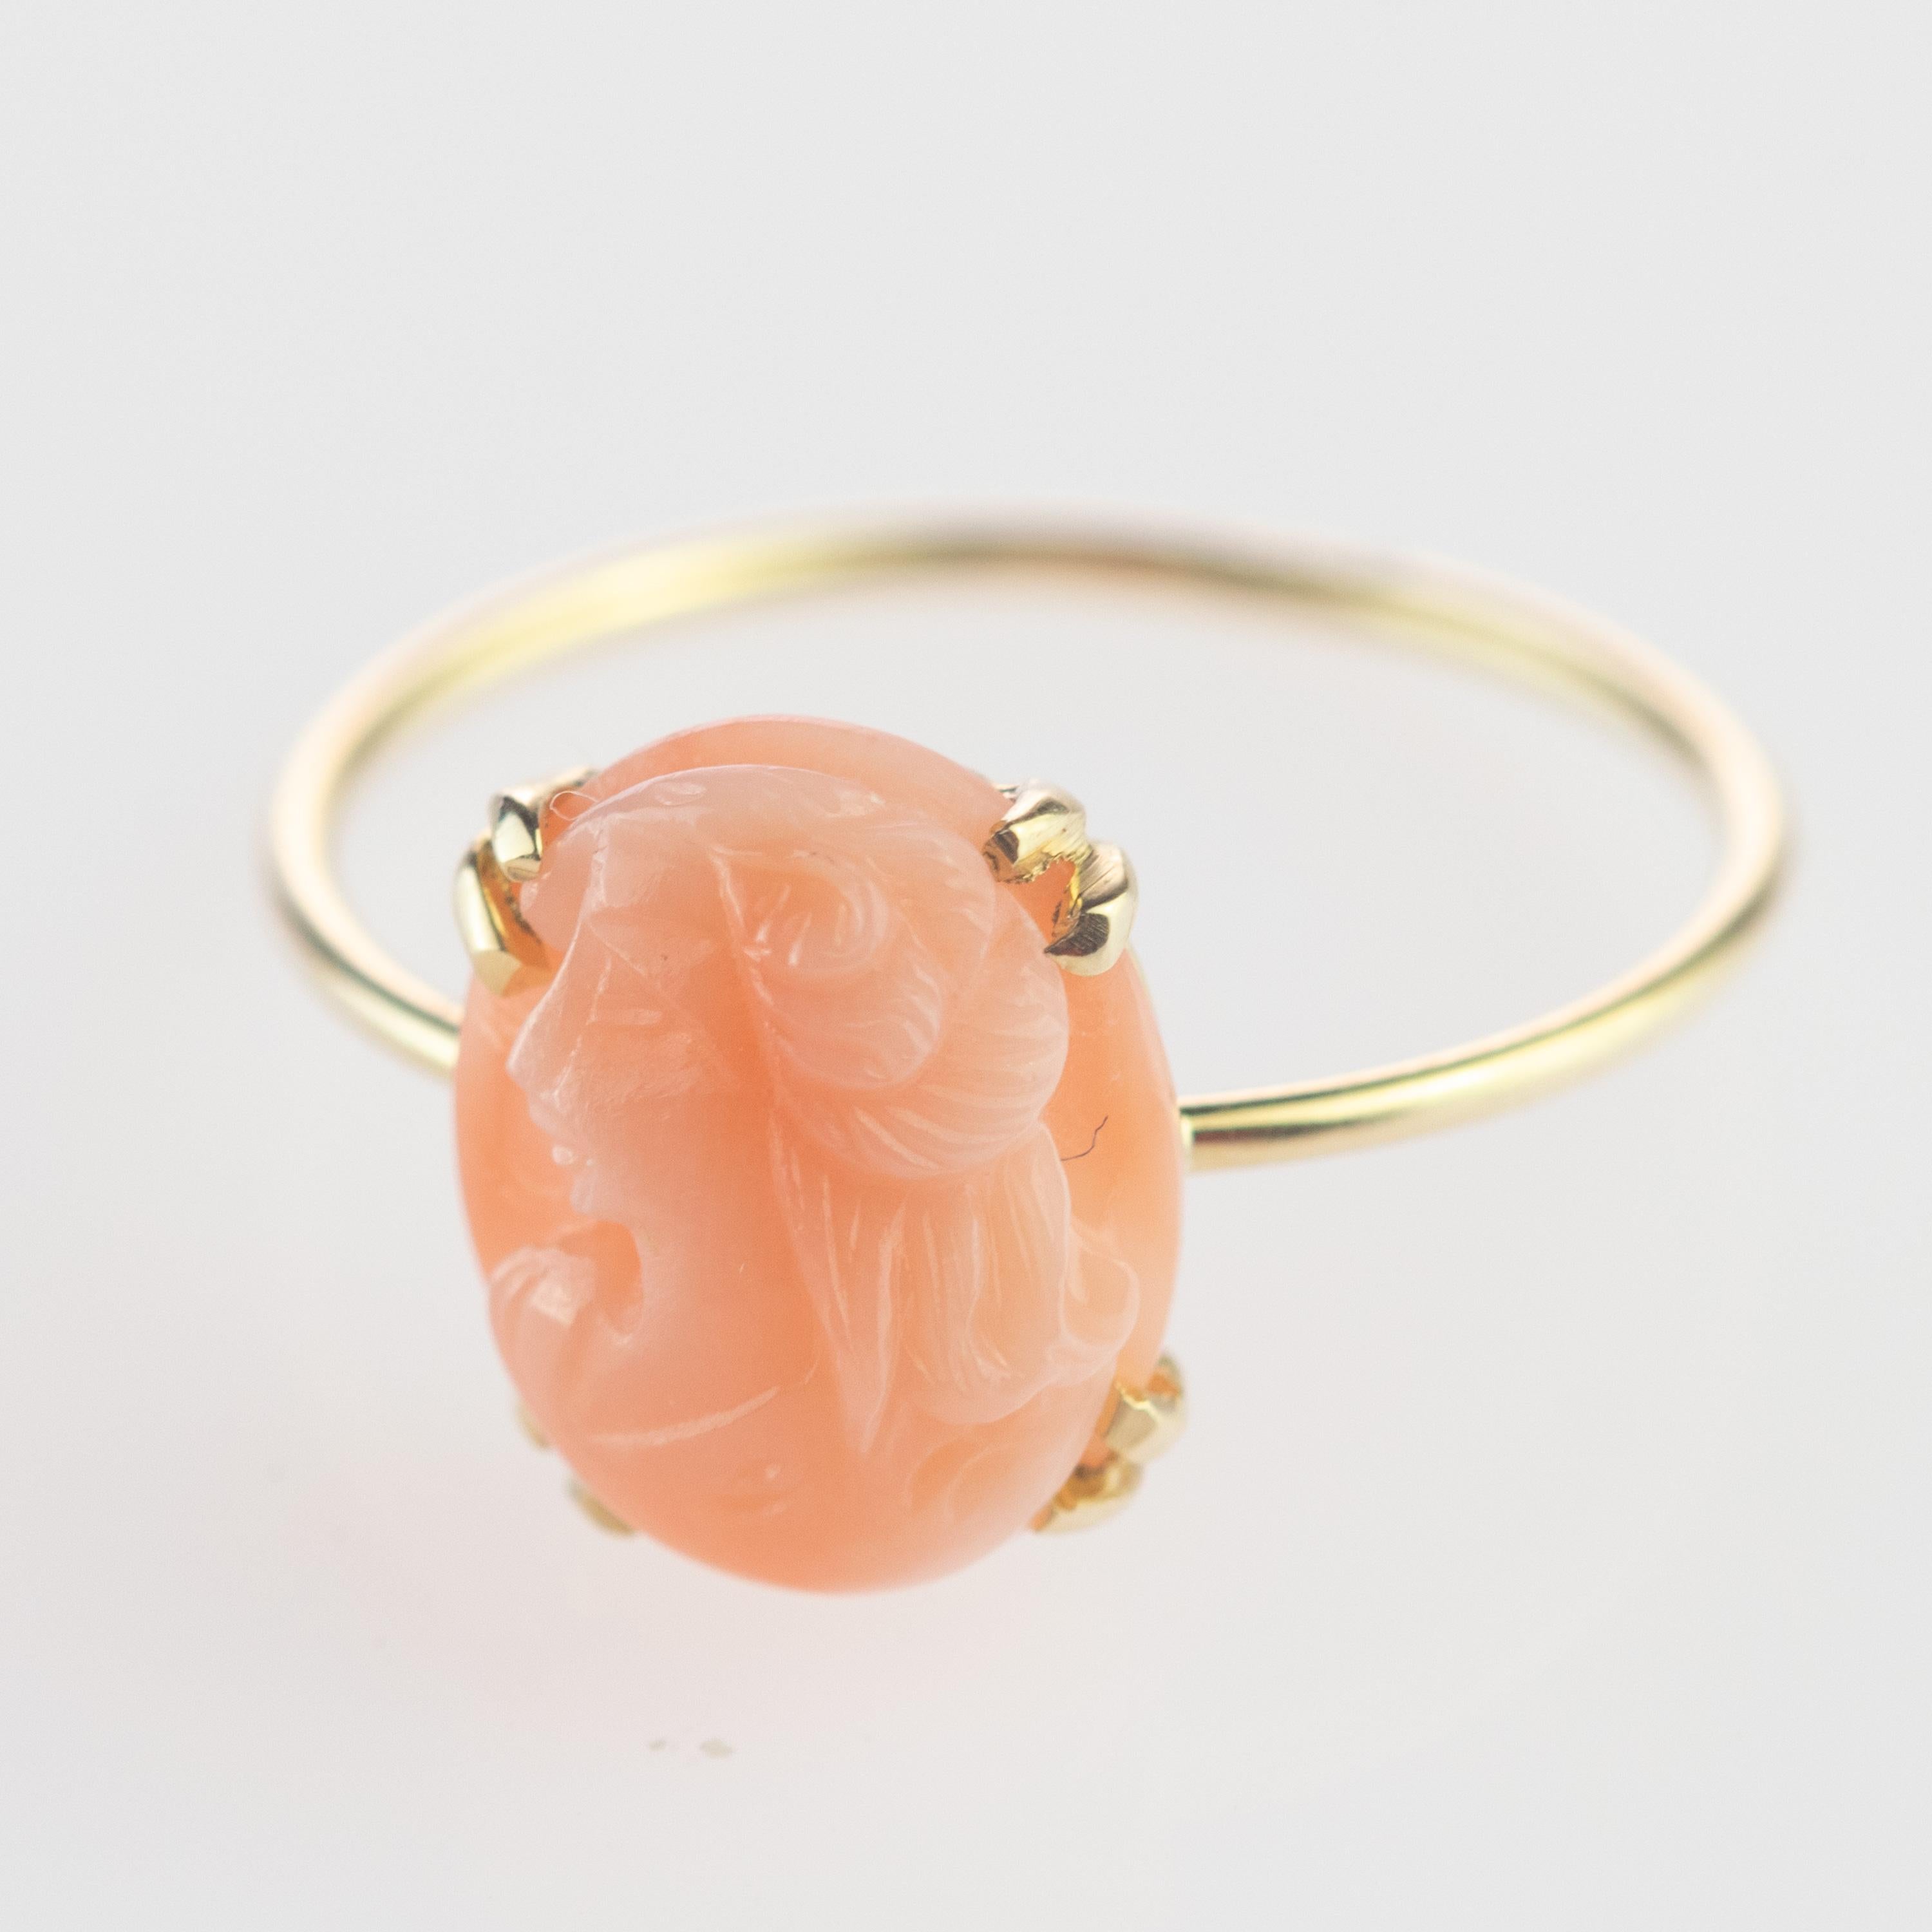 Intini Jewels 1.5 Carat Pink Cammeo Coral 18 Karat Gold Oval Handmade Chic Ring For Sale 2